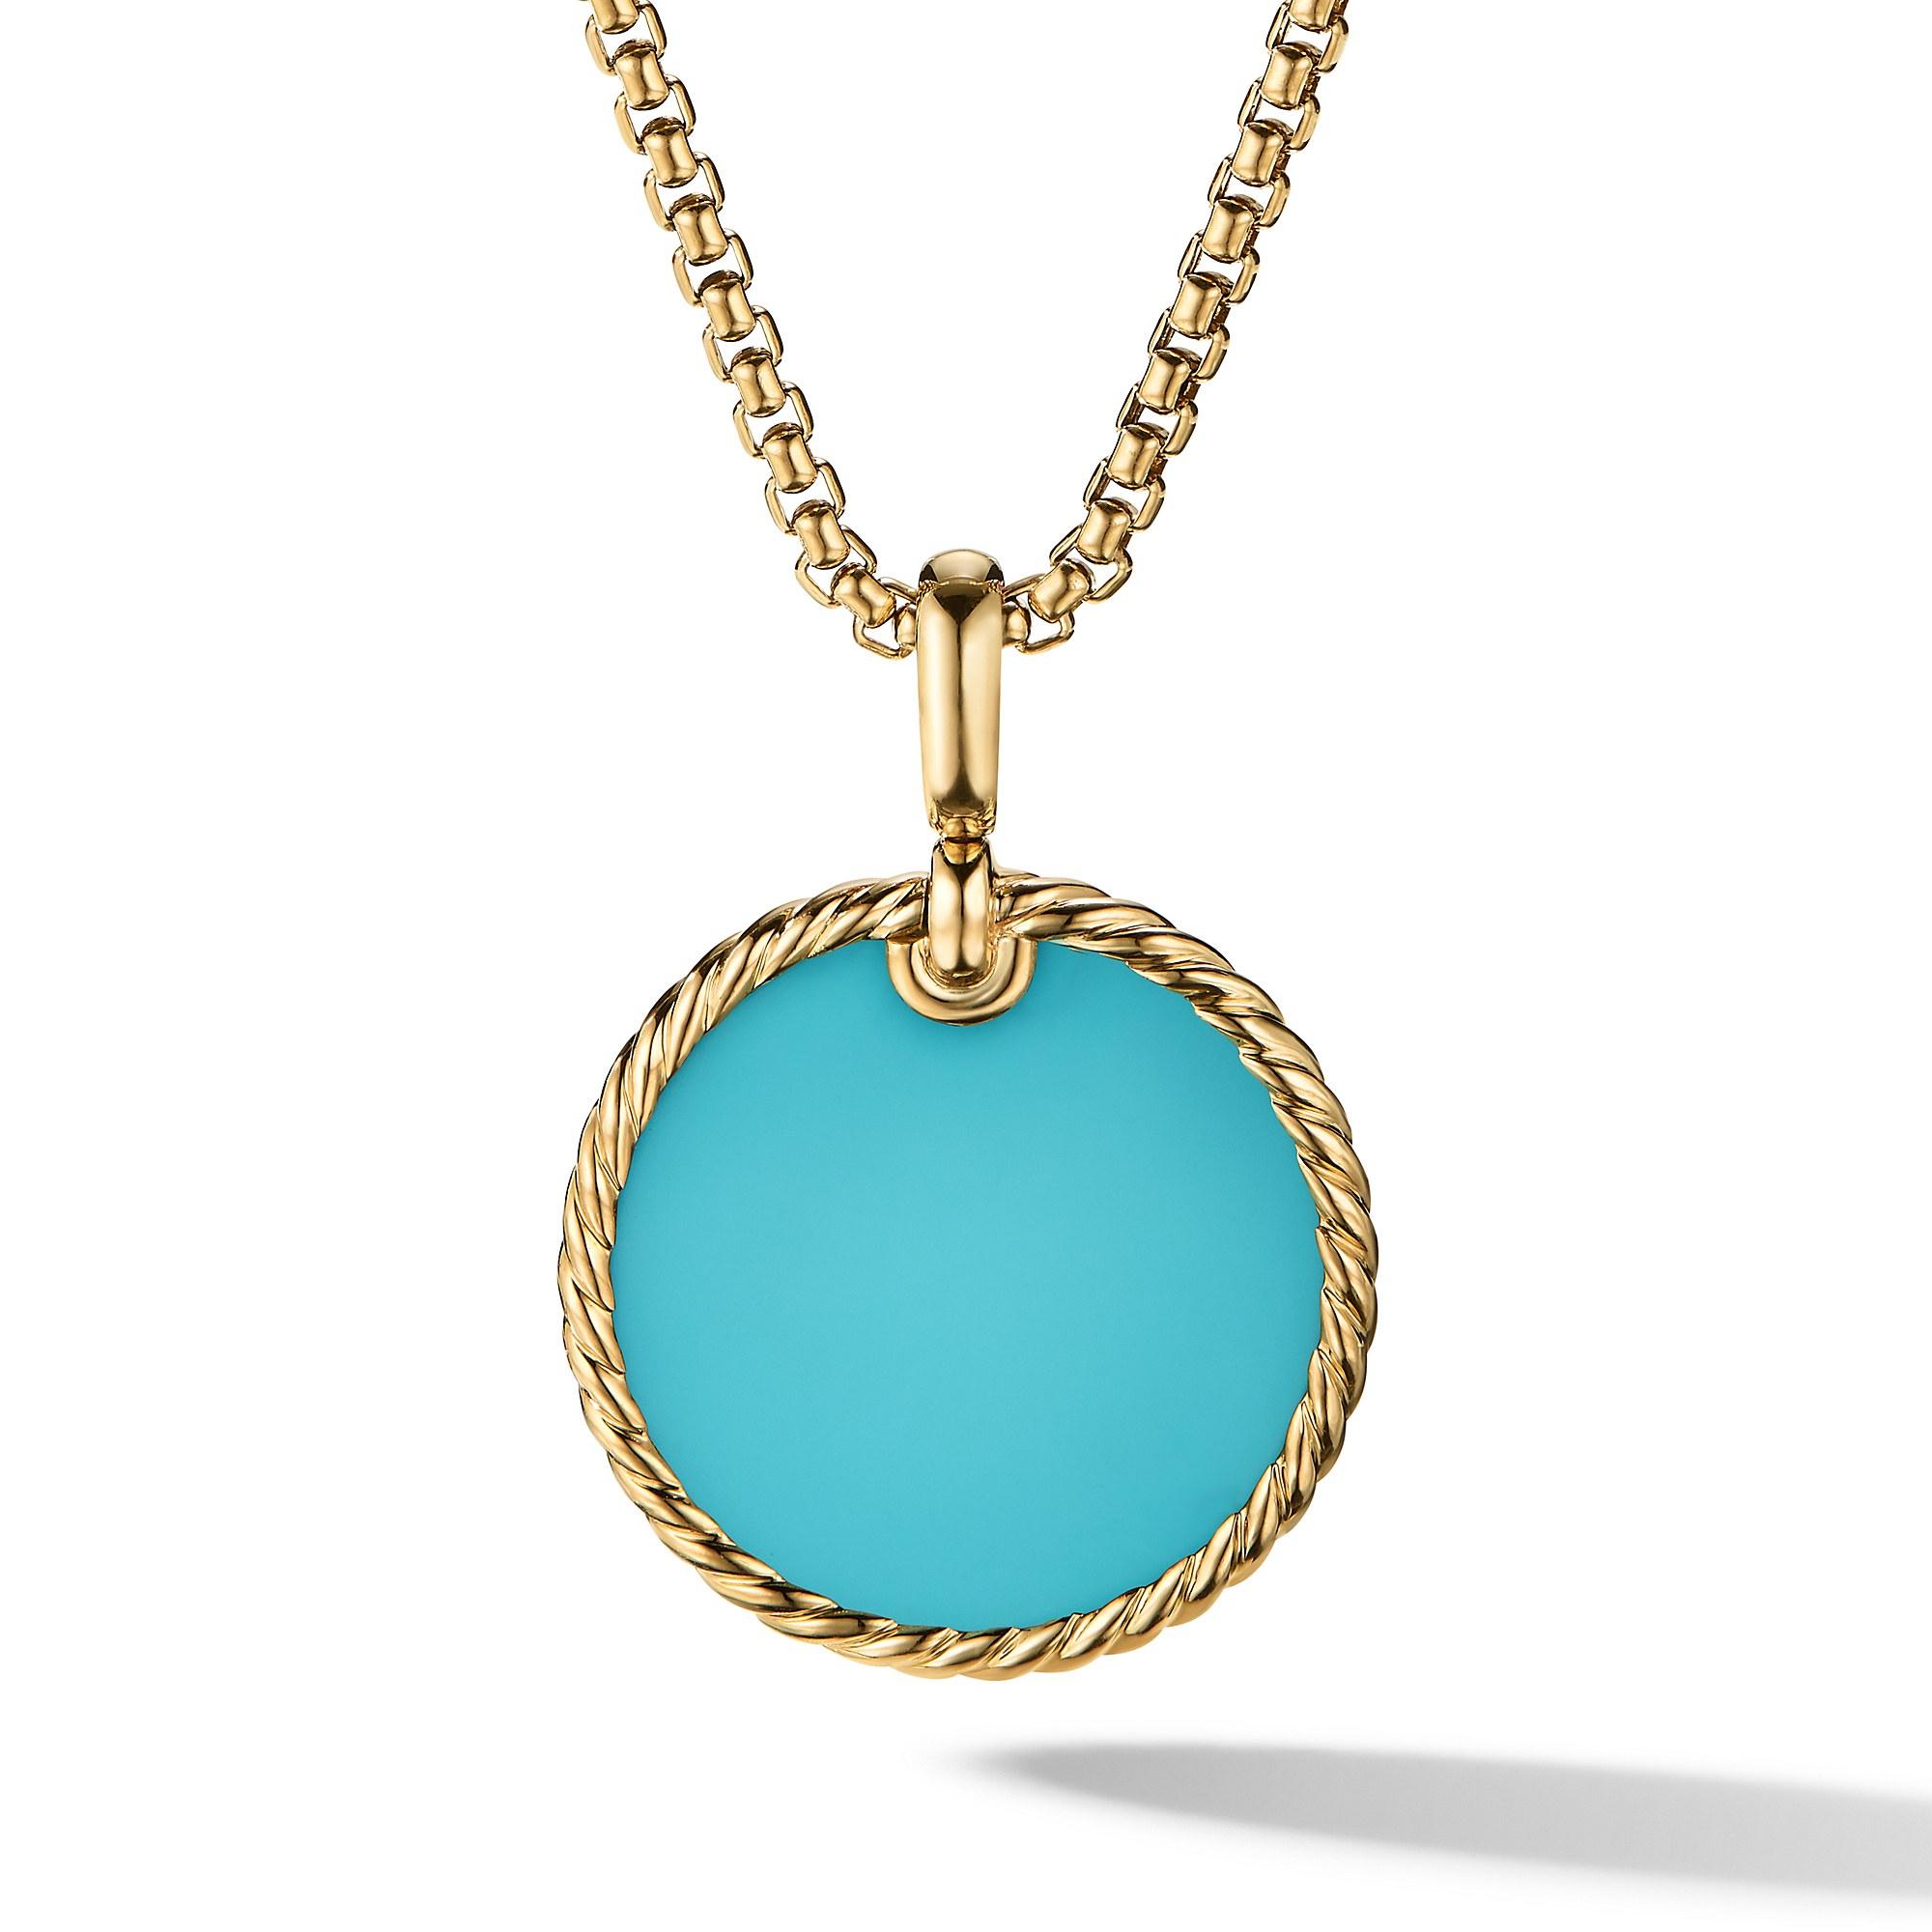 David Yurman DY Elements Disc Pendant in 18K Yellow Gold with Turquoise, 24mm